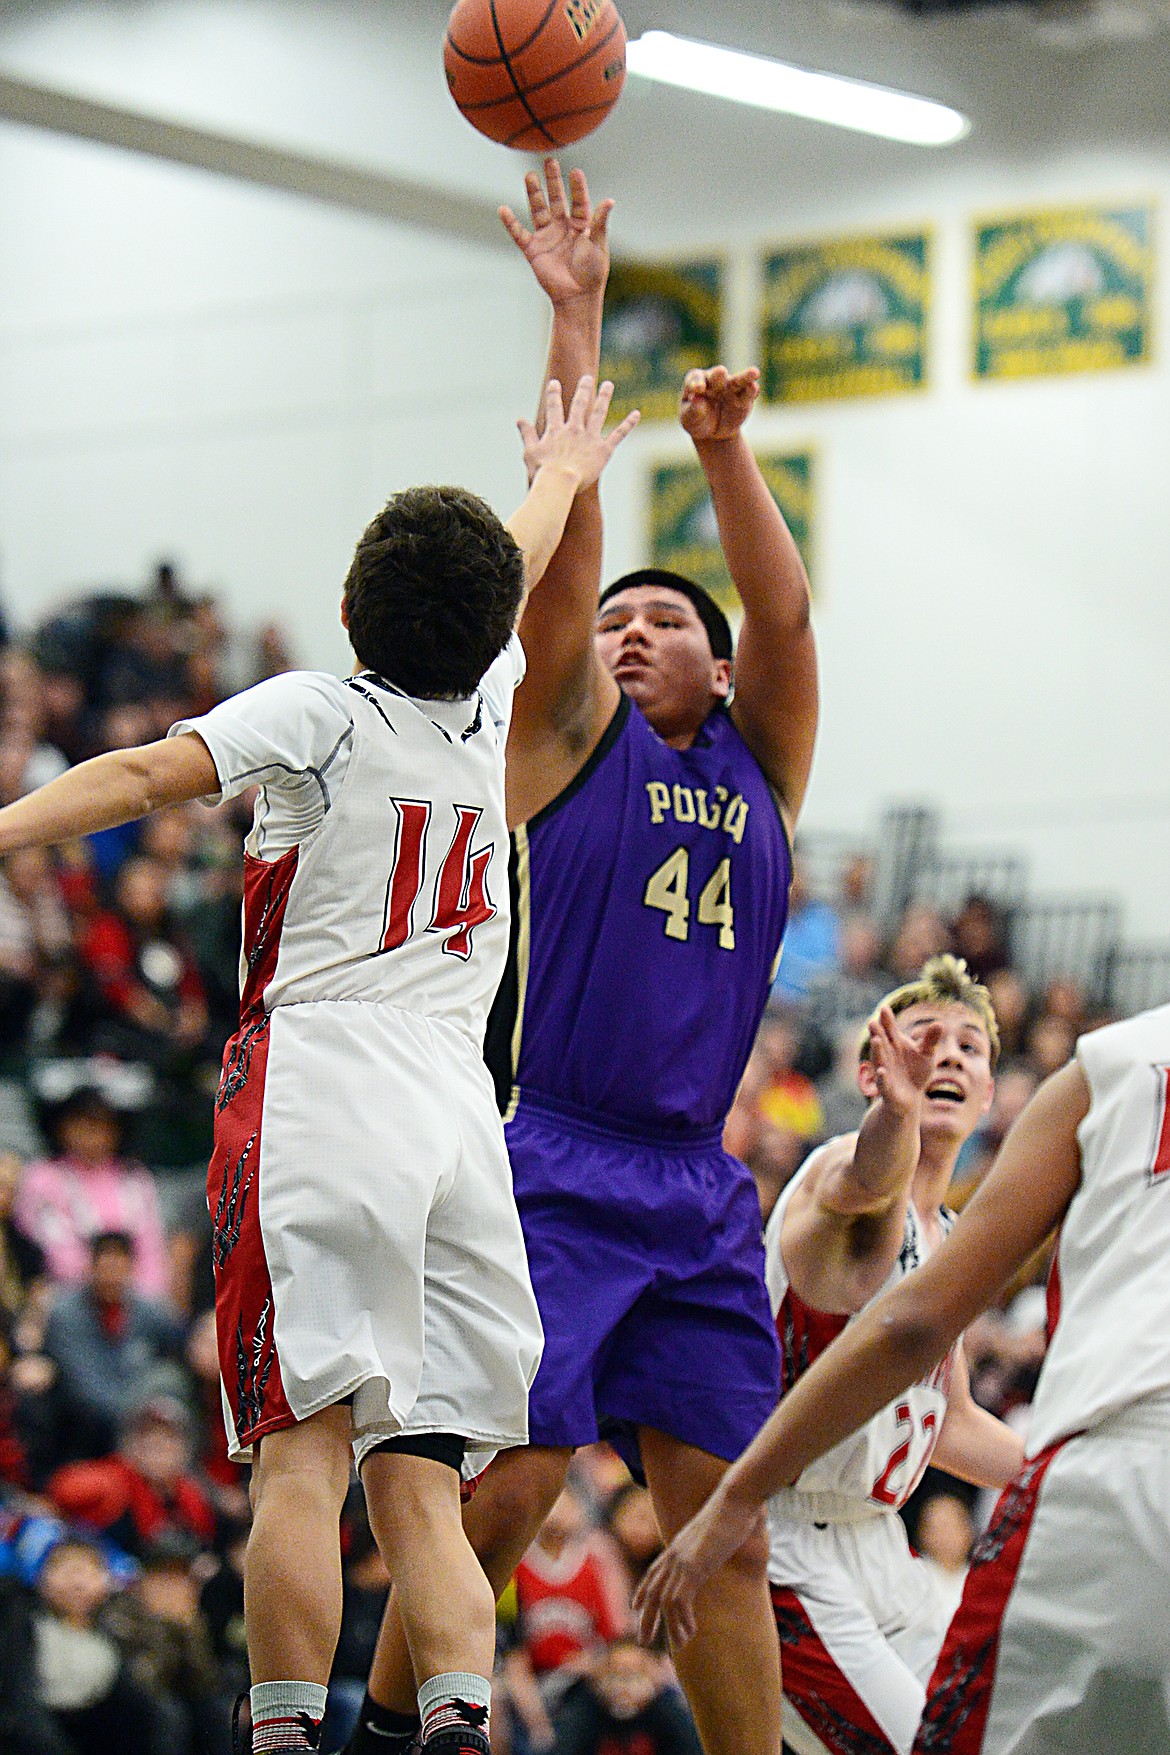 Polson's Micah Askan (44) shoots over Browning's Derek Sharp (14) during the Northwest A District boys' championship game at Whitefish High School on Saturday. Browning won, 78-50. (Casey Kreider/Daily Inter Lake)